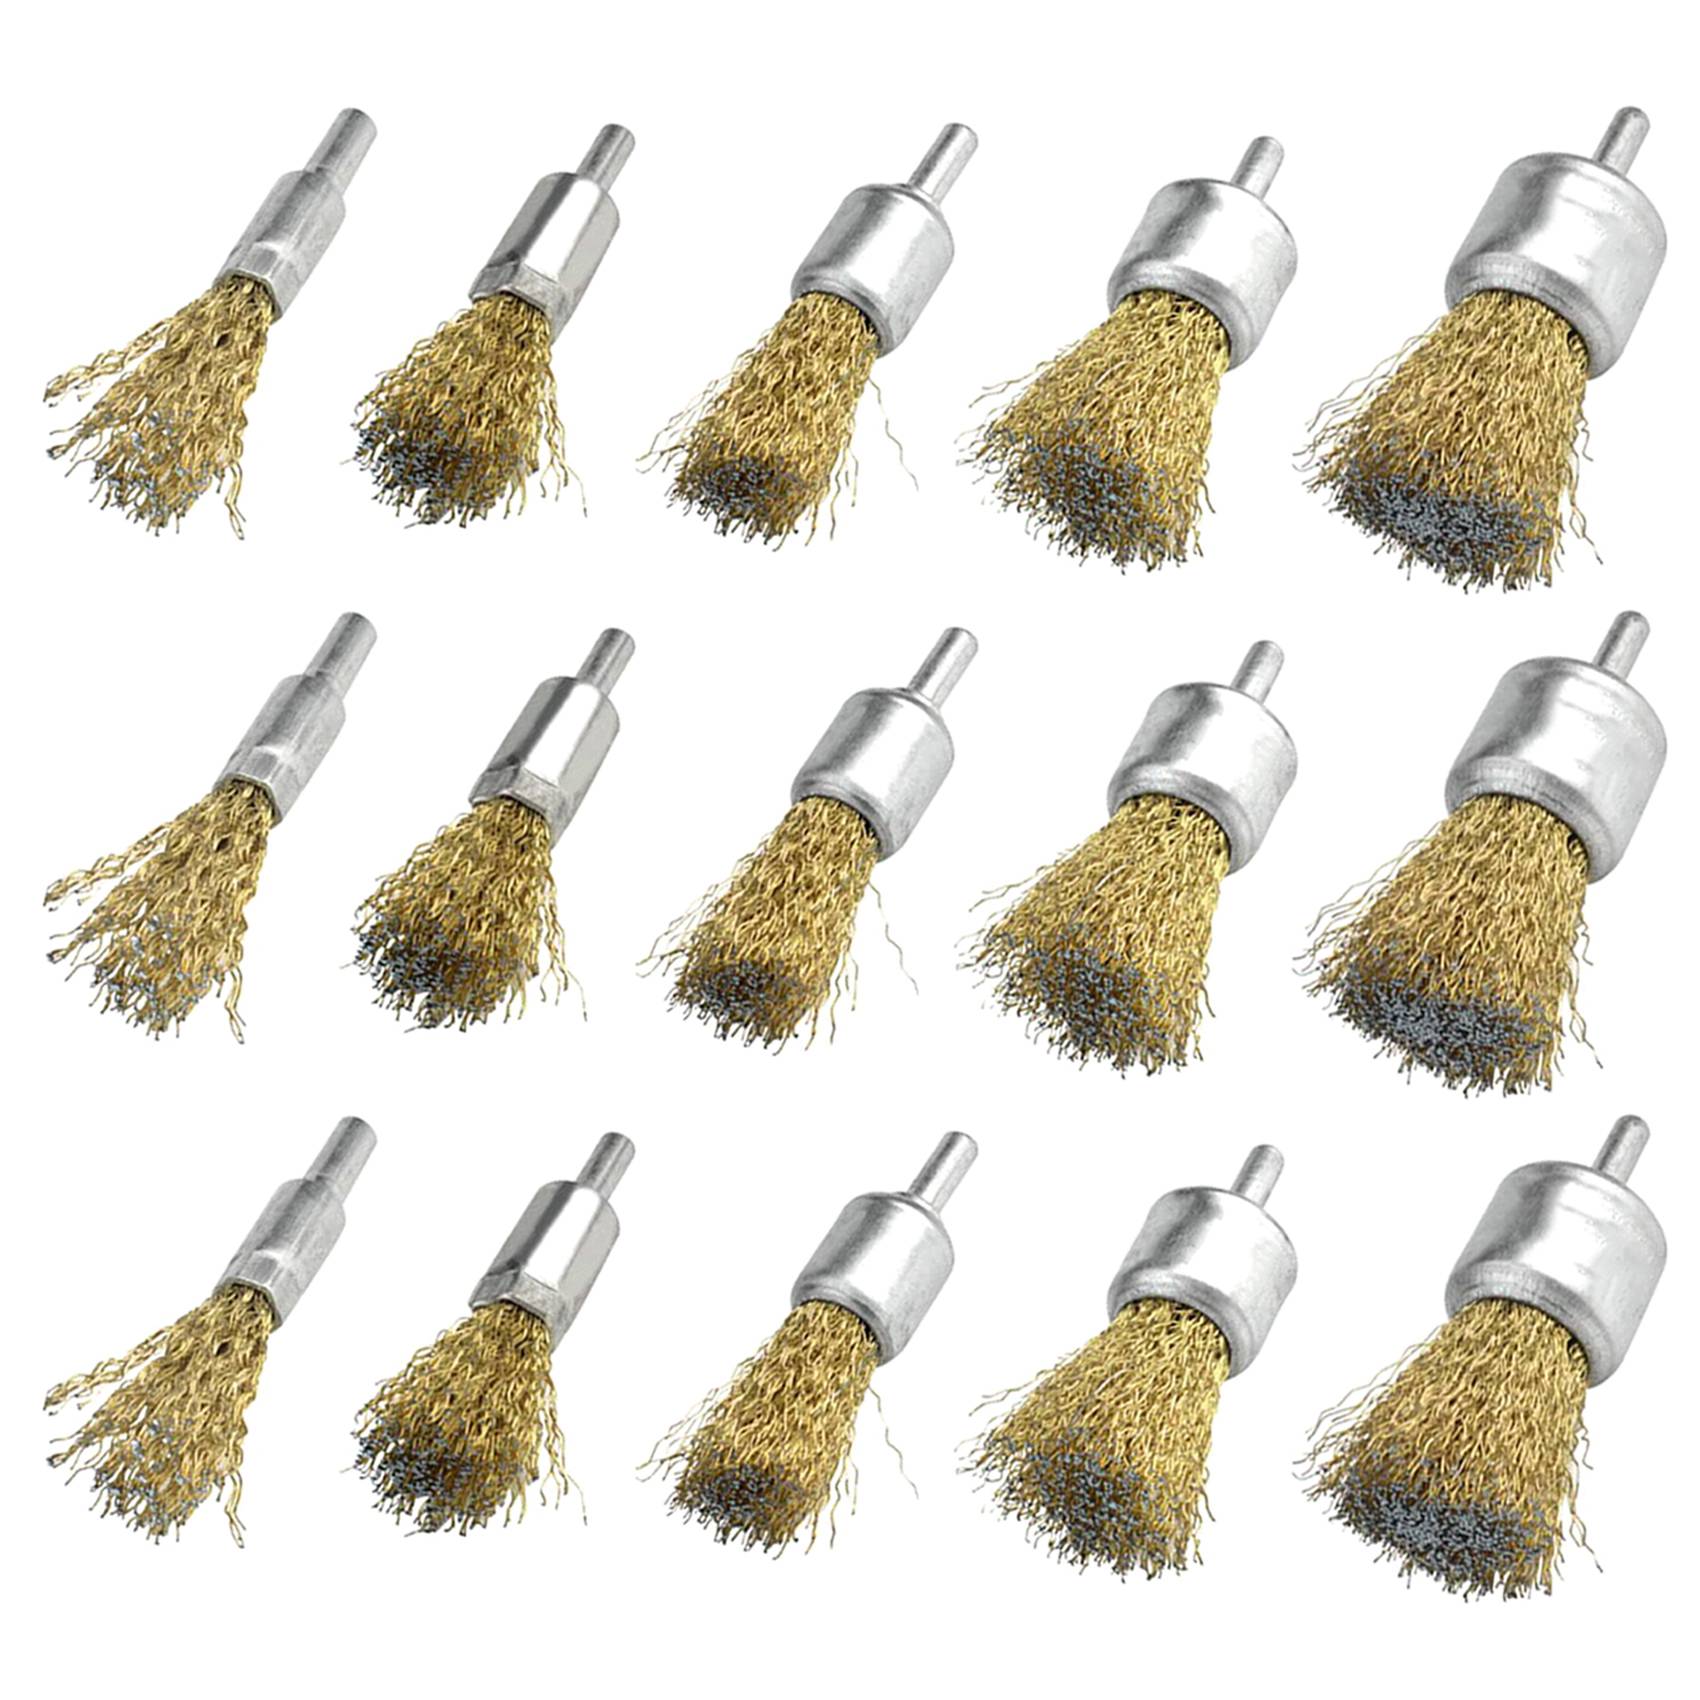 15 Pack Wire Brush Kit With 1/4 Inch Hex Shank, Wire Cup Brush For